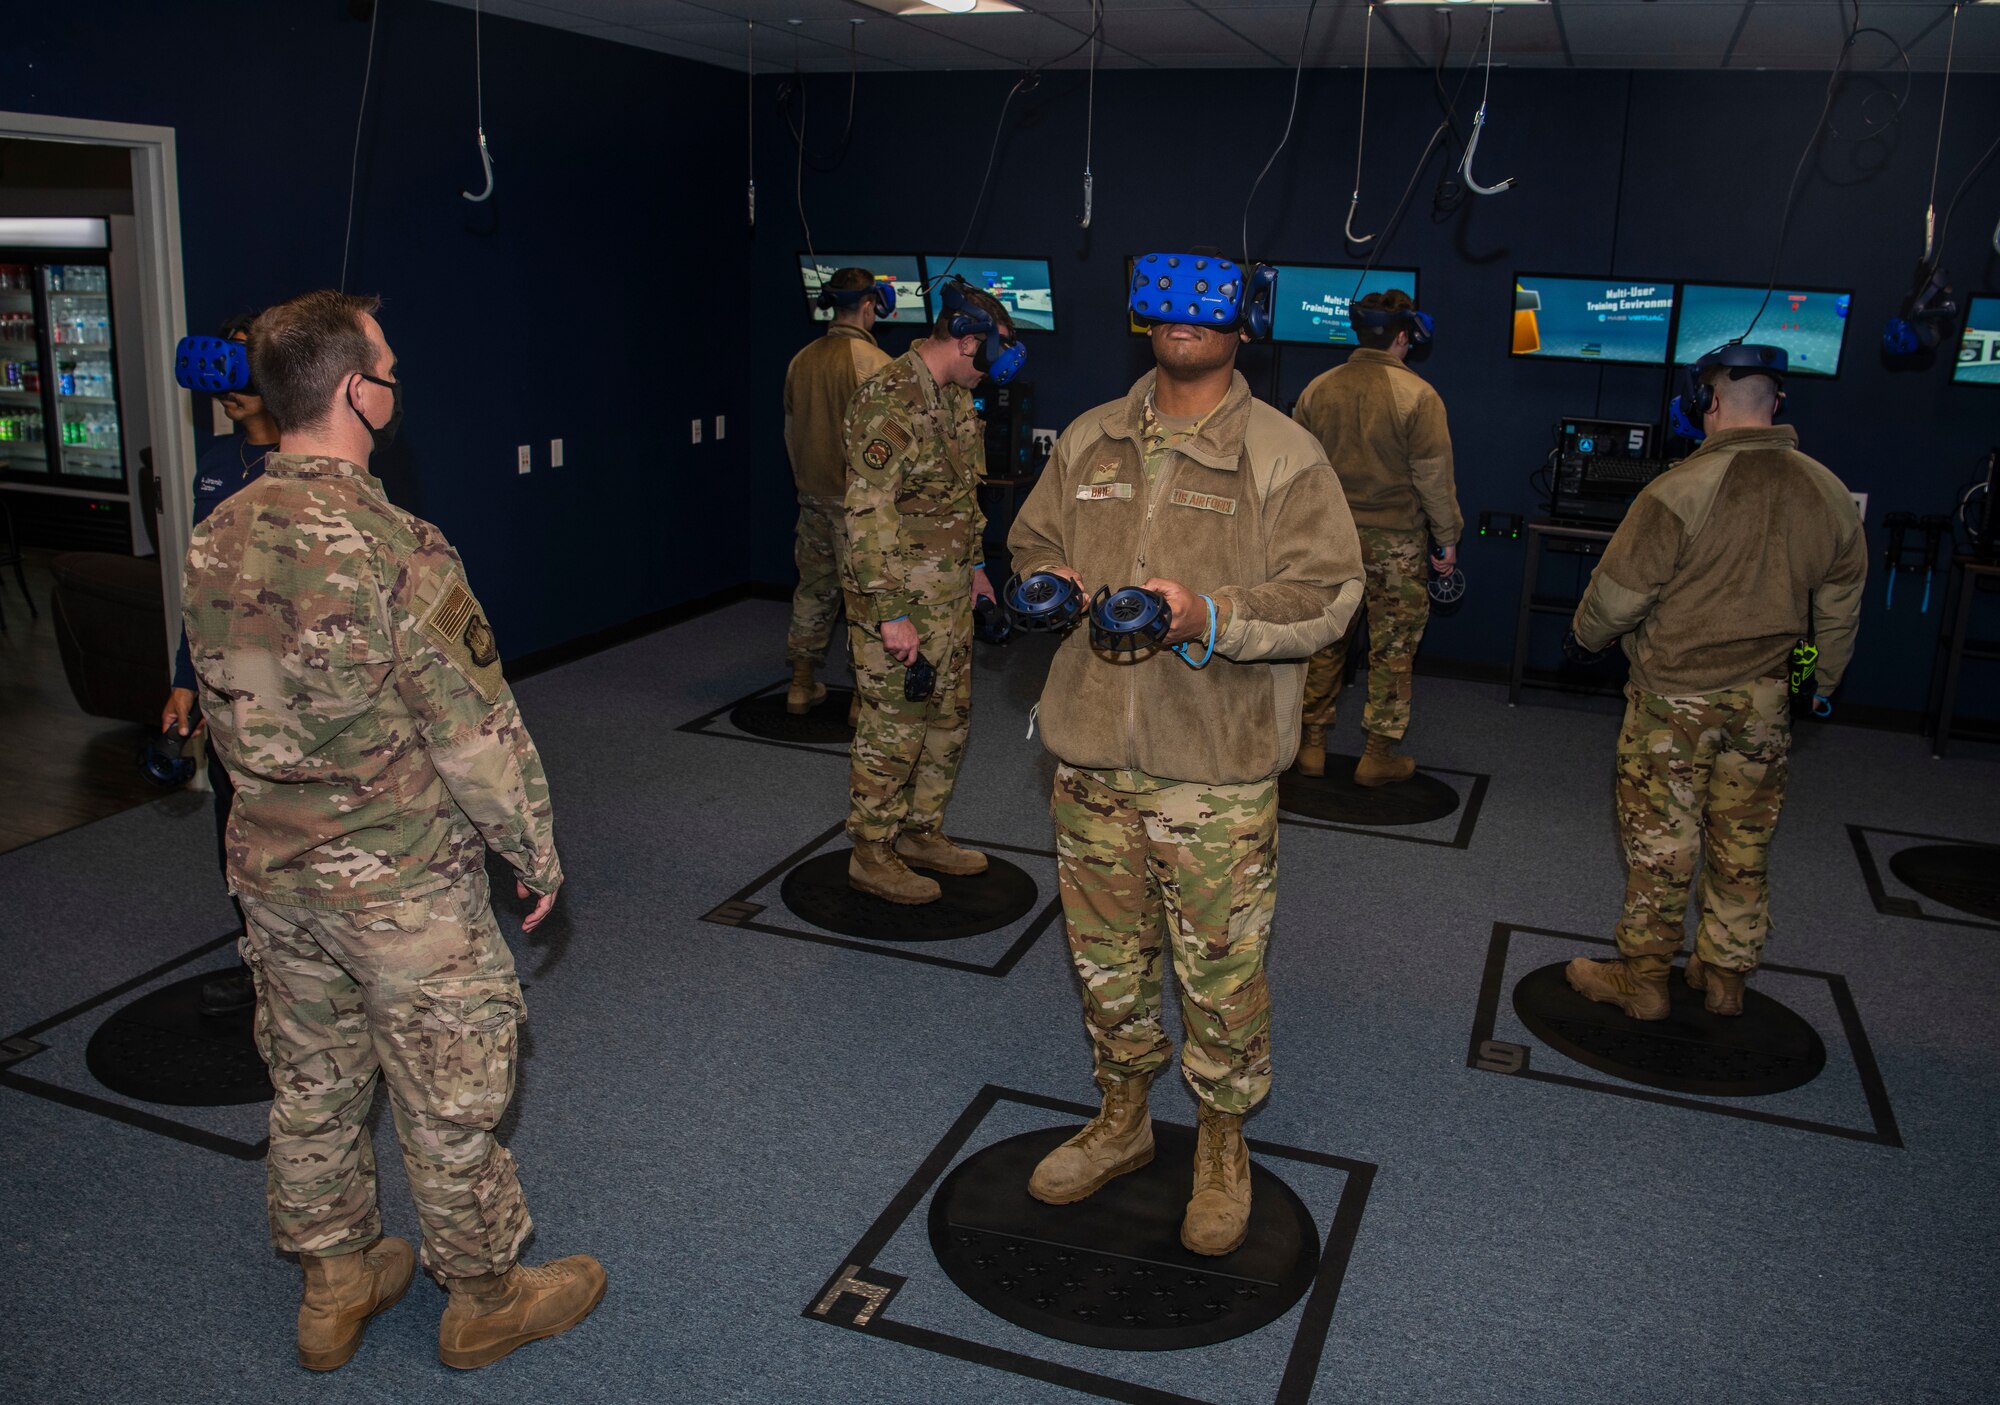 The 7th Civil Engineering Squadron’s fire department train in virtual reality headsets in the 317th Maintenance Group’s VR Lab at Dyess Air Force Base, Texas, Jan. 20, 2021.